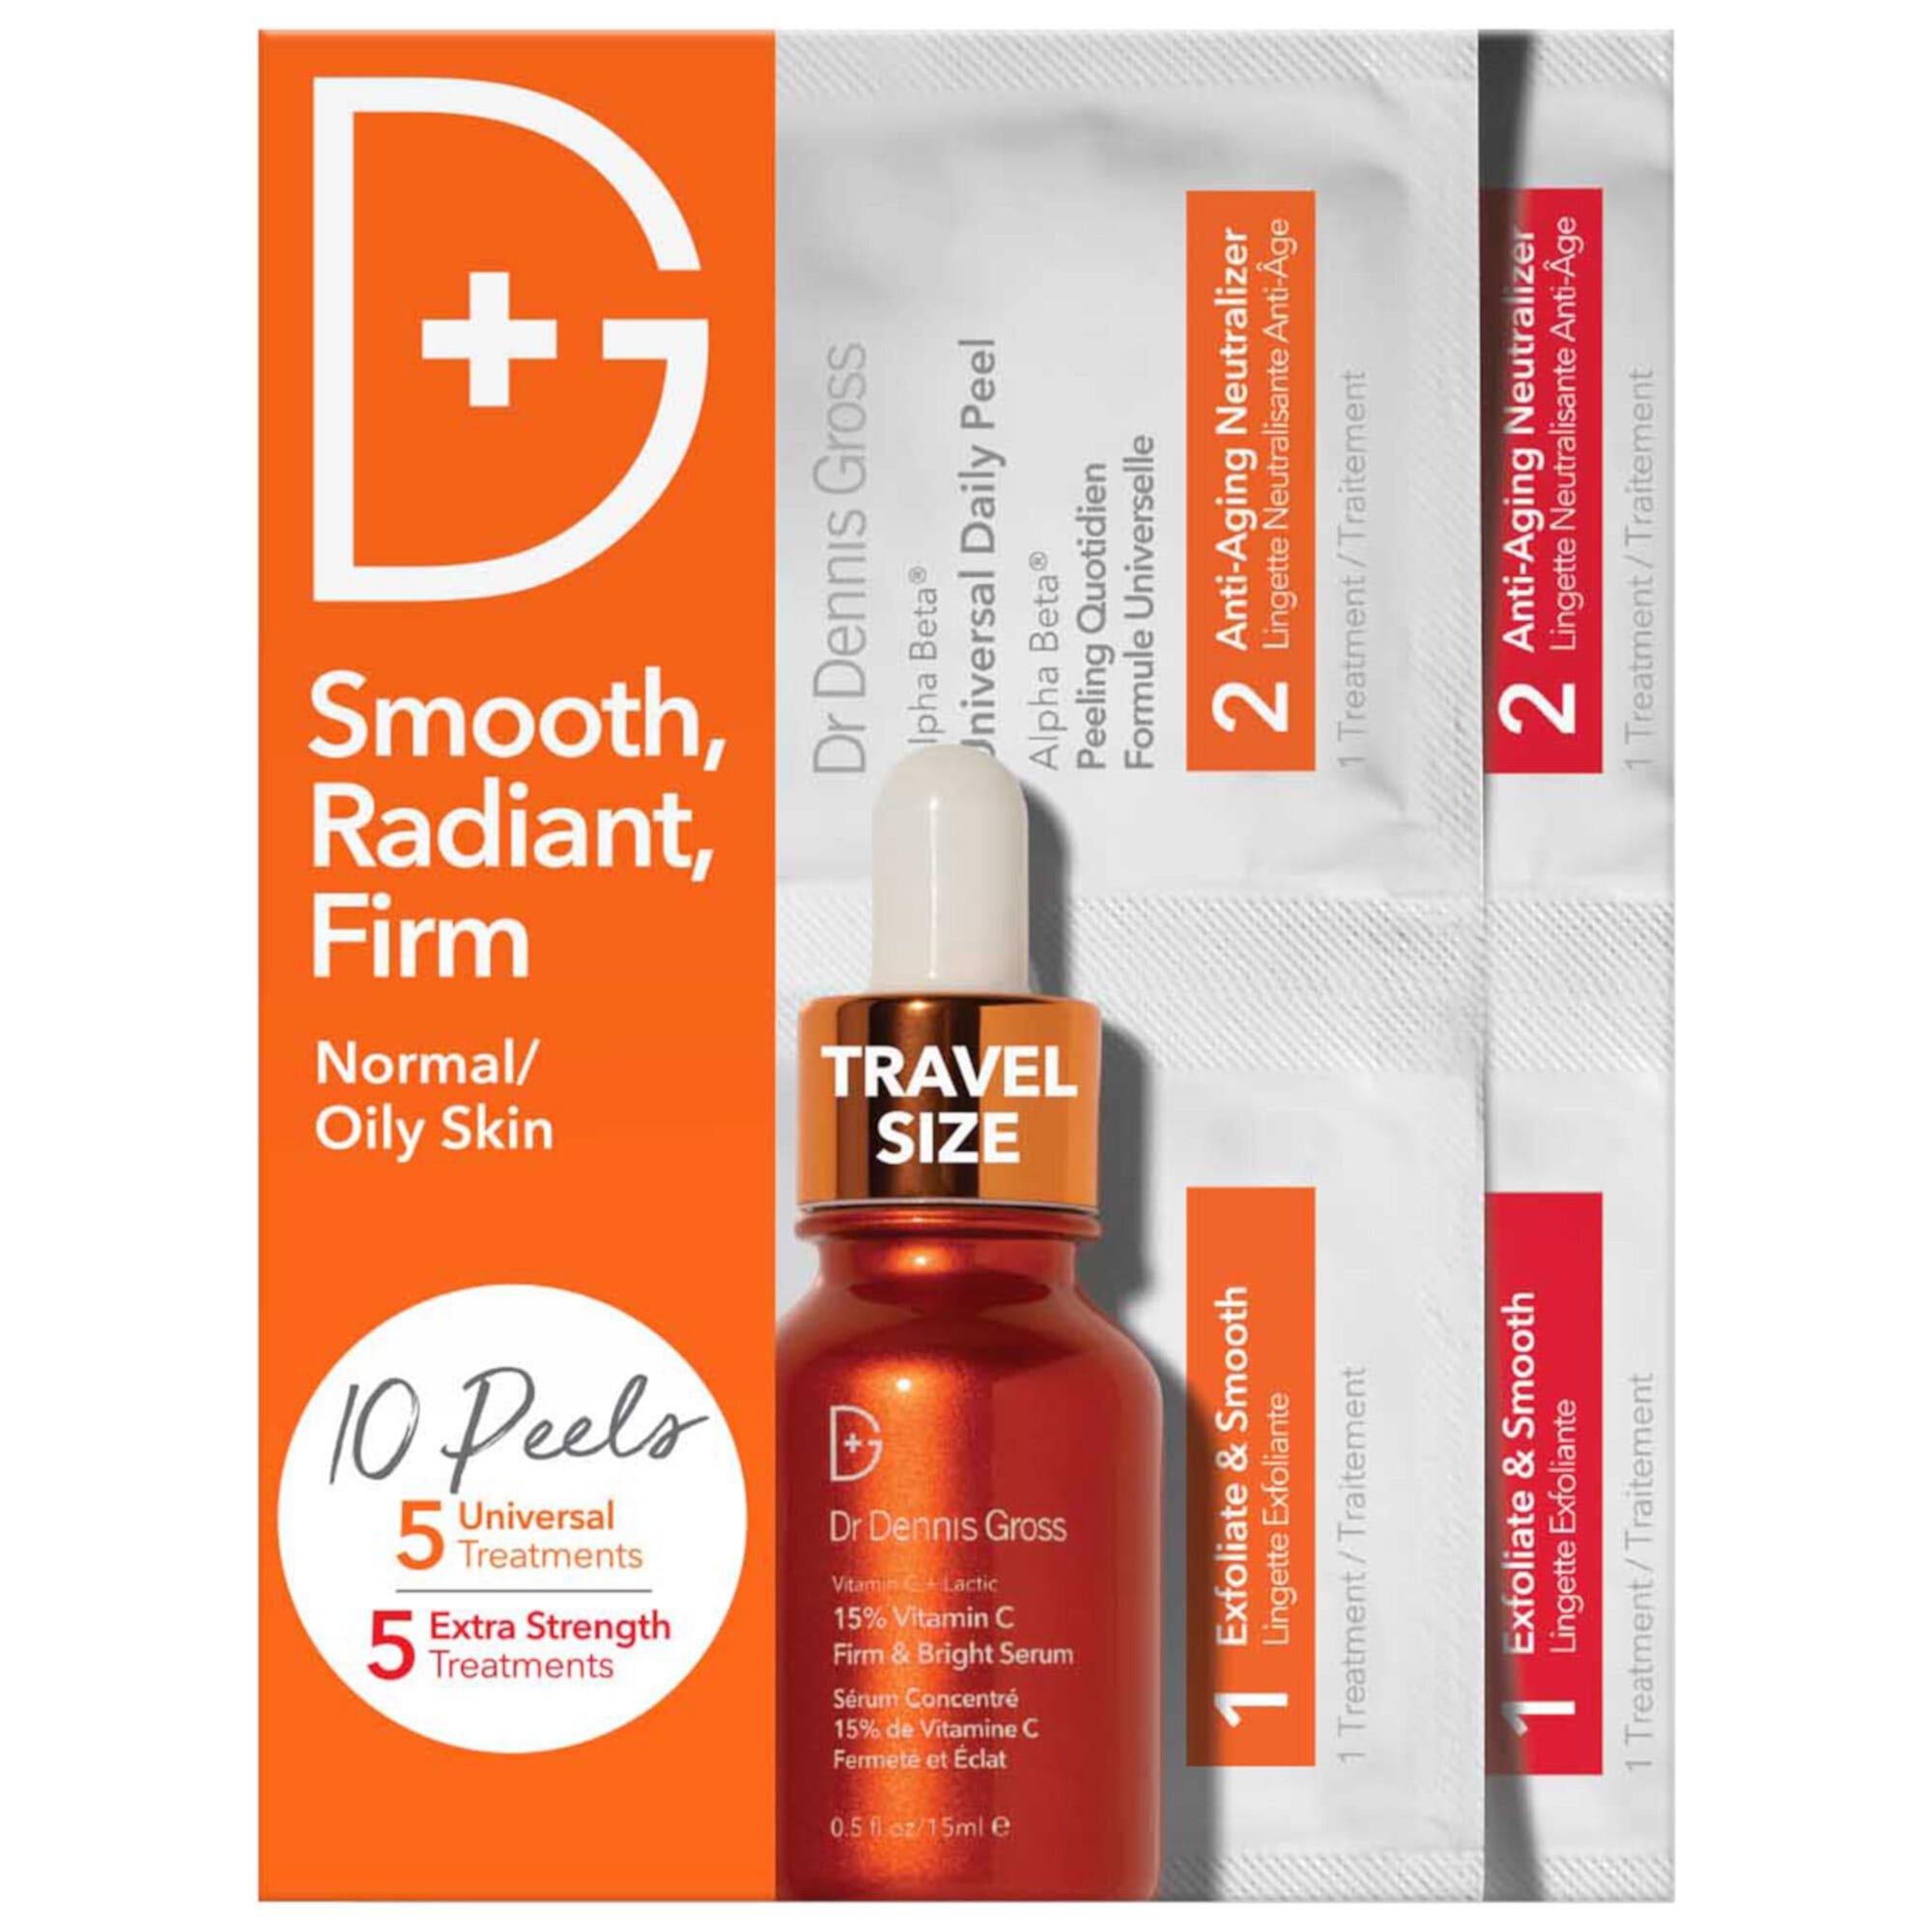 Smooth, Radiant, Firm Kit for Normal / Oily Skin Dr. Dennis Gross Skincare